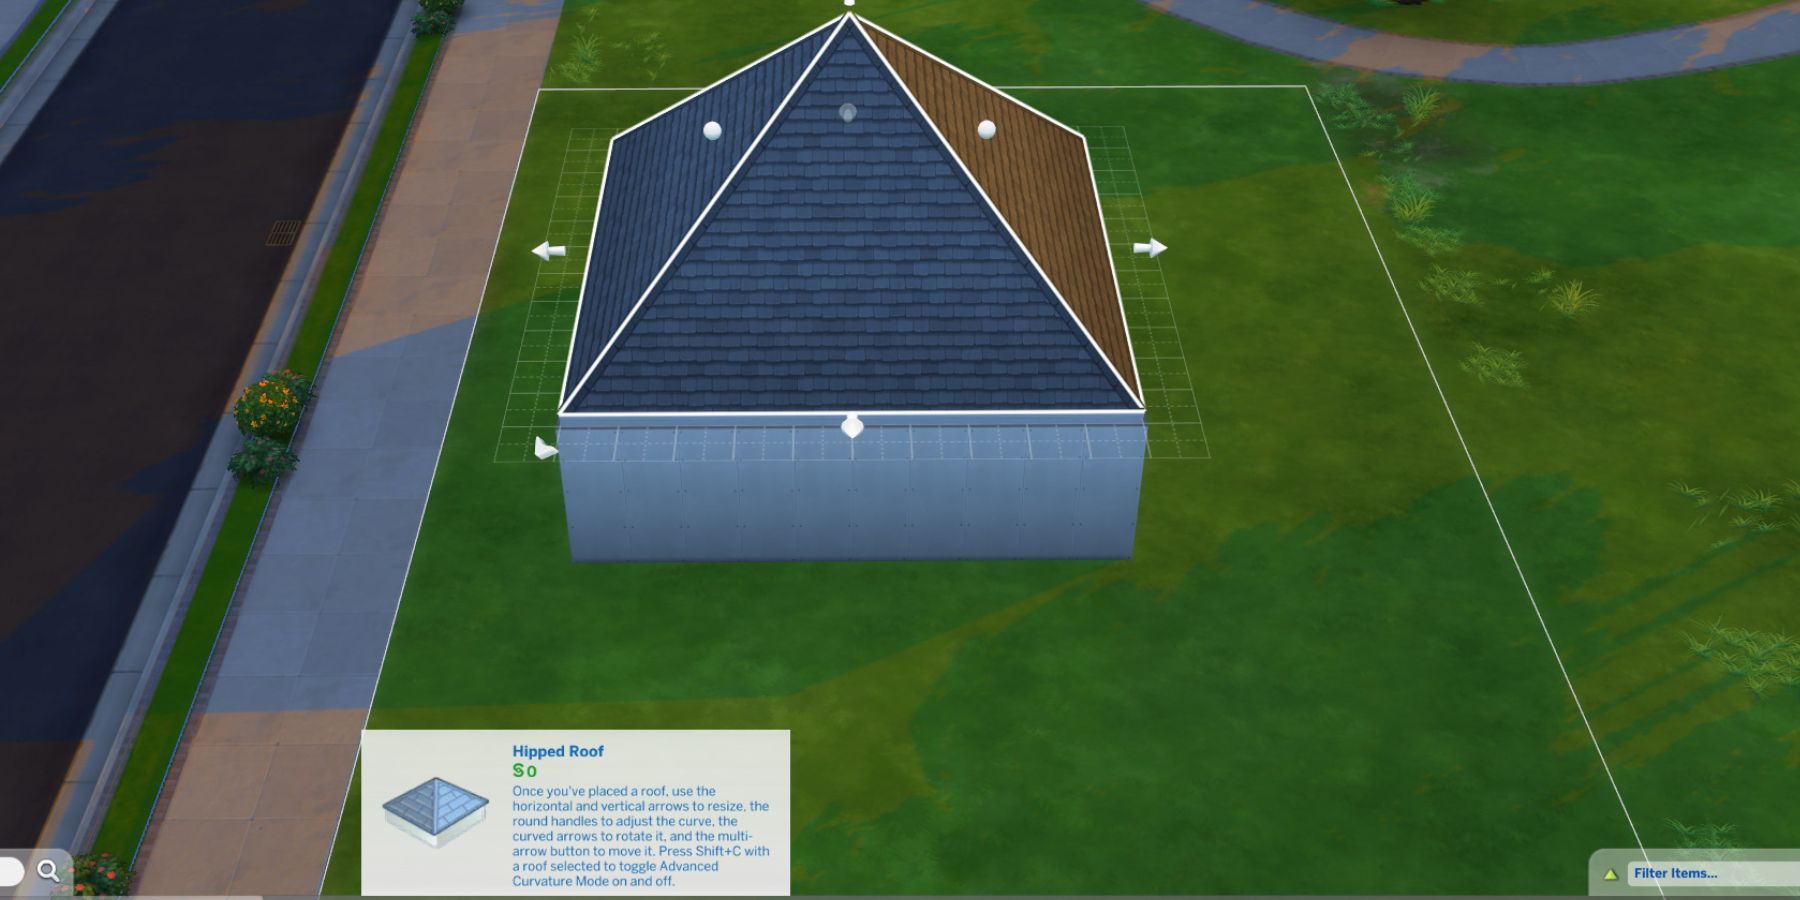 The Sims 4 Hipped roof